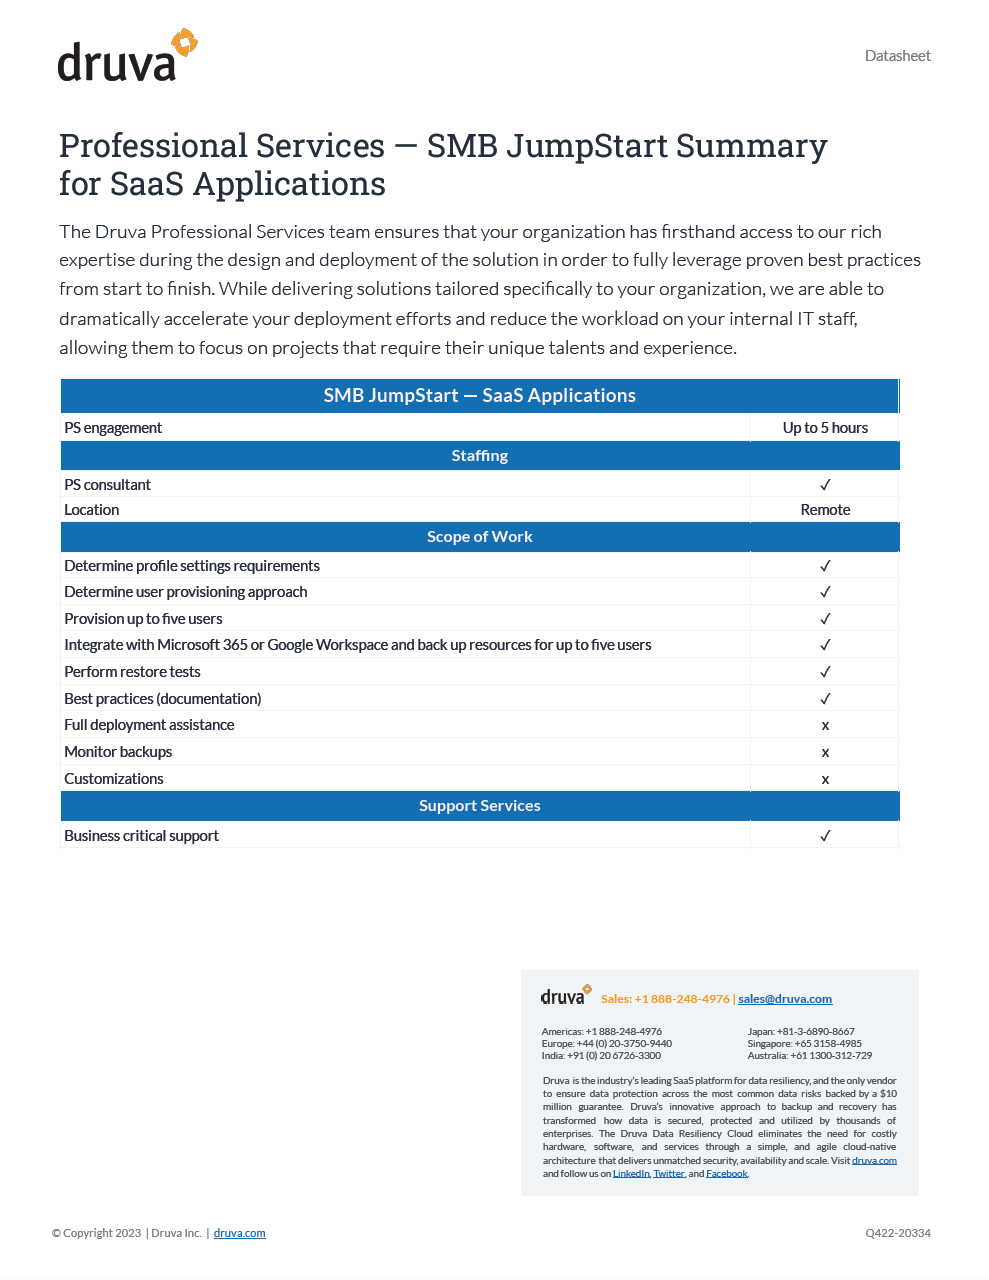 Professional Services — SMB JumpStart Summary for SaaS Applications